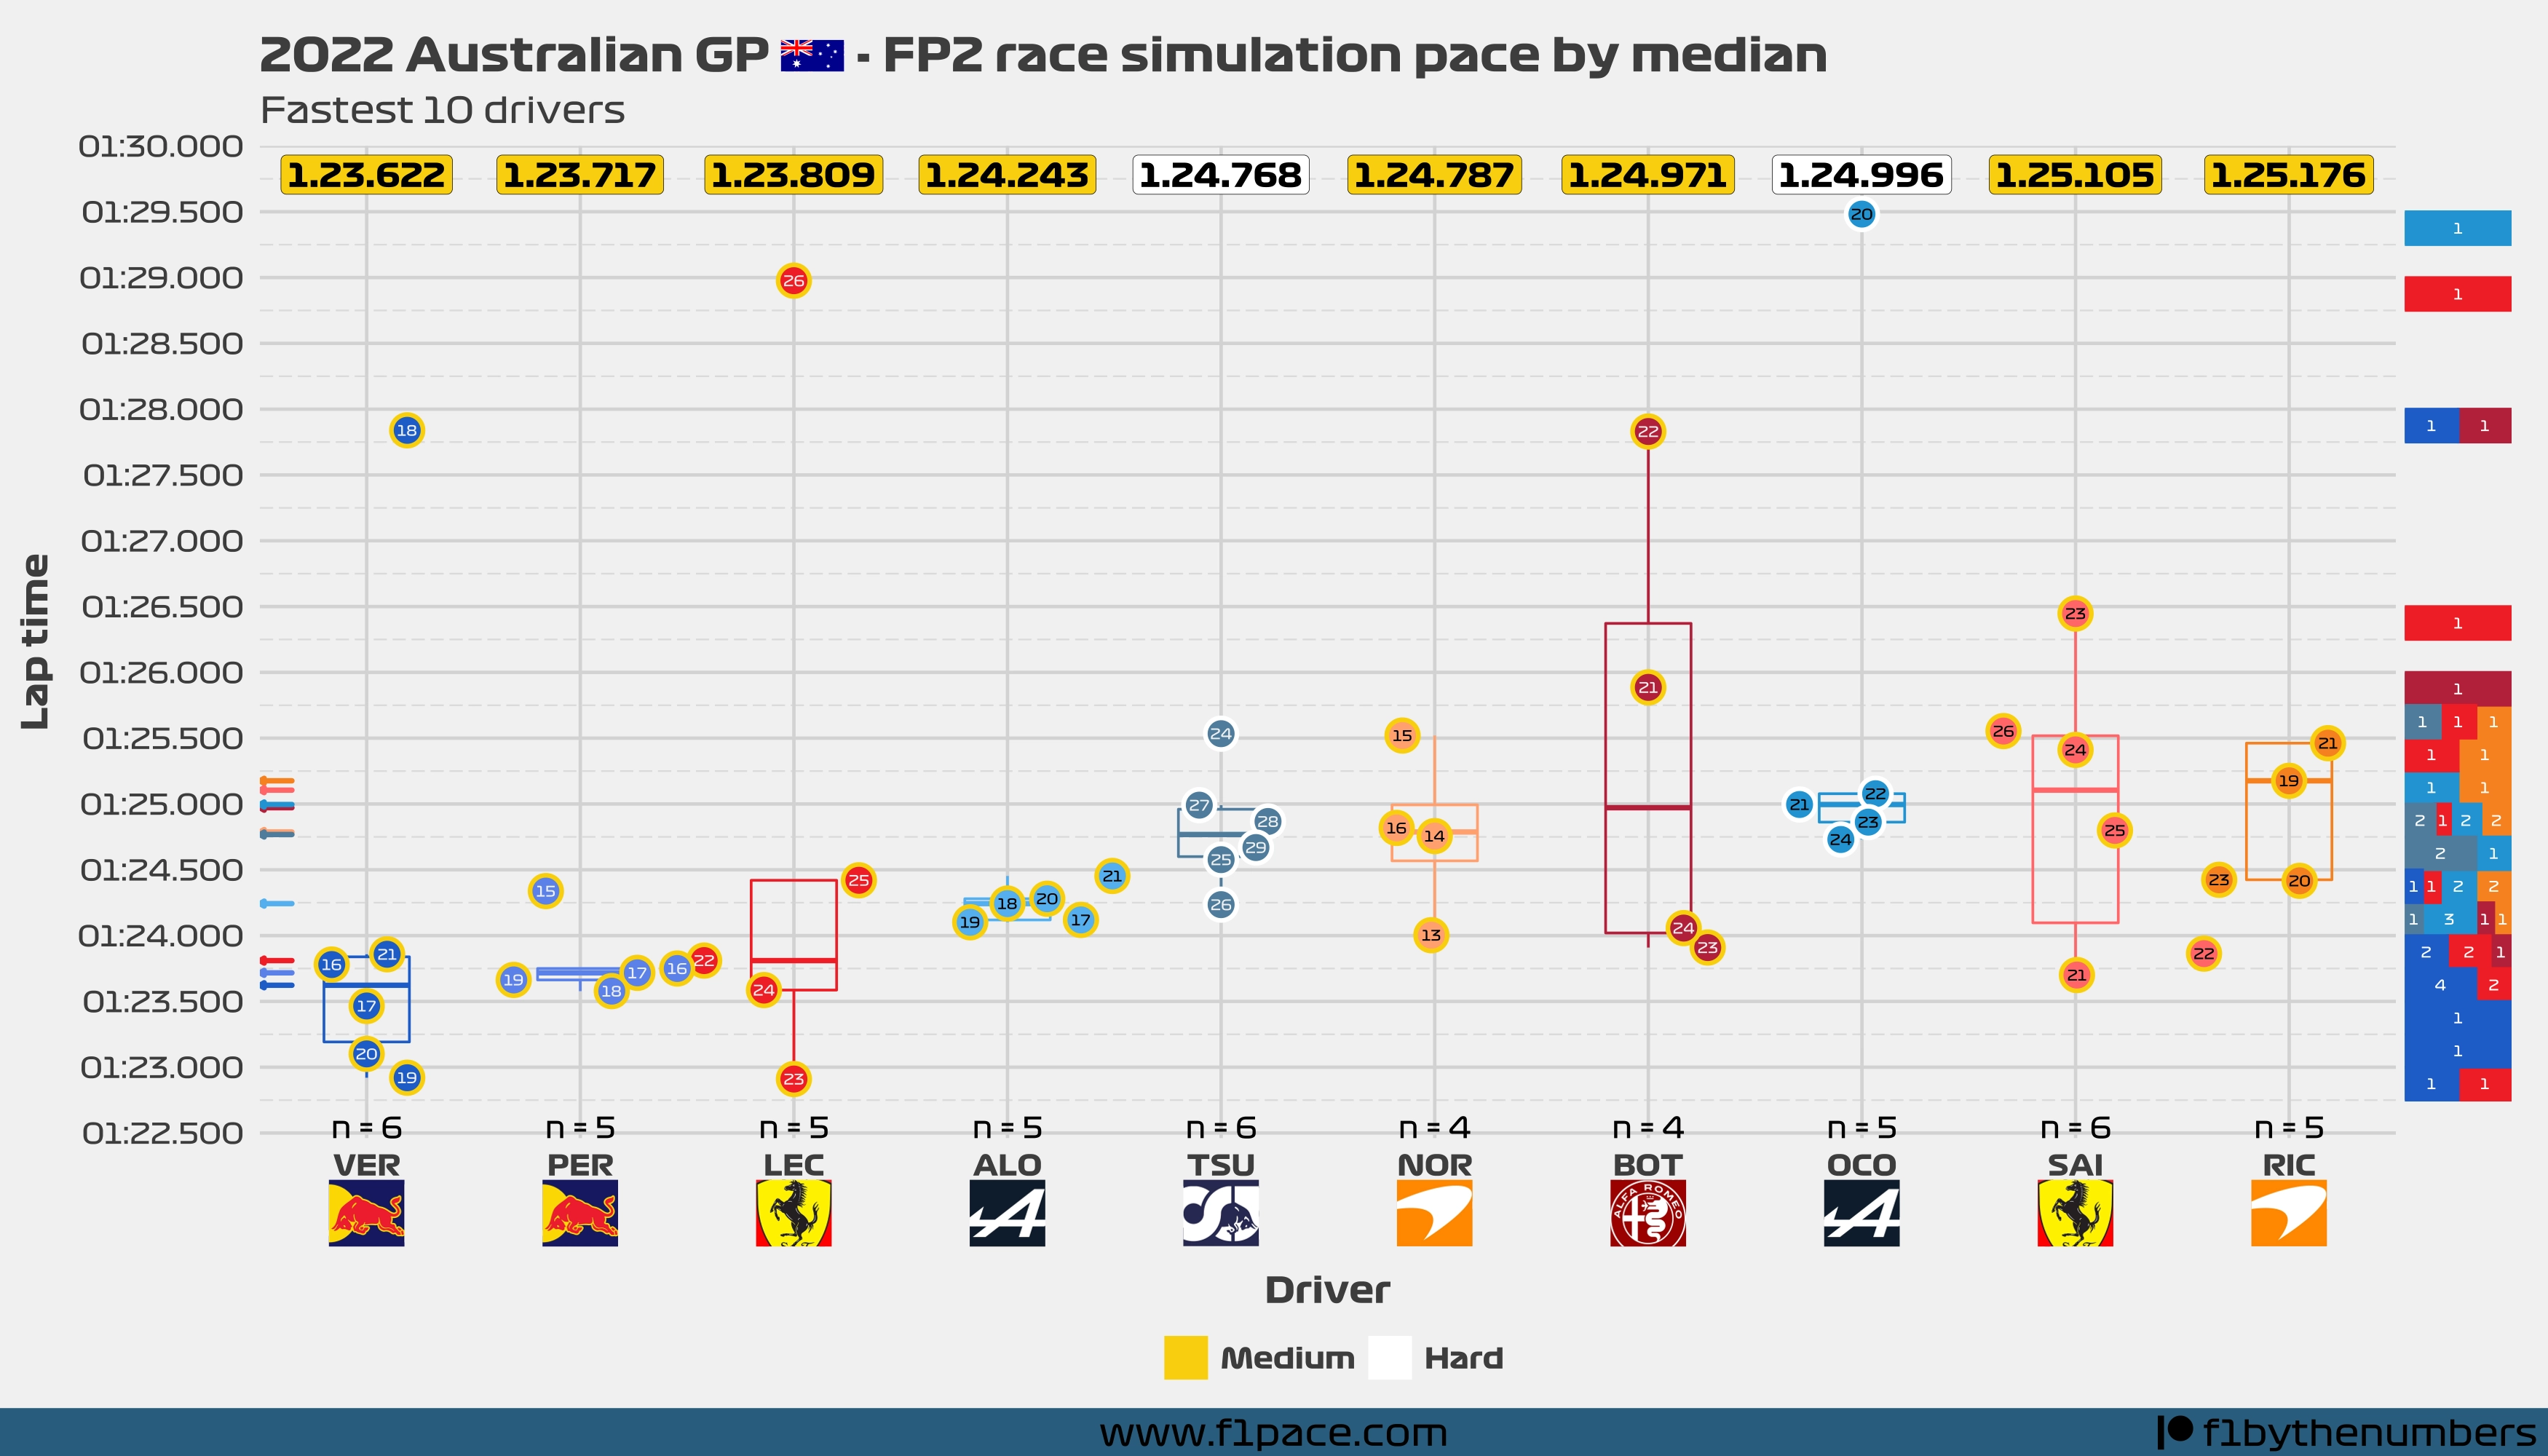 Race pace: Top 10 drivers